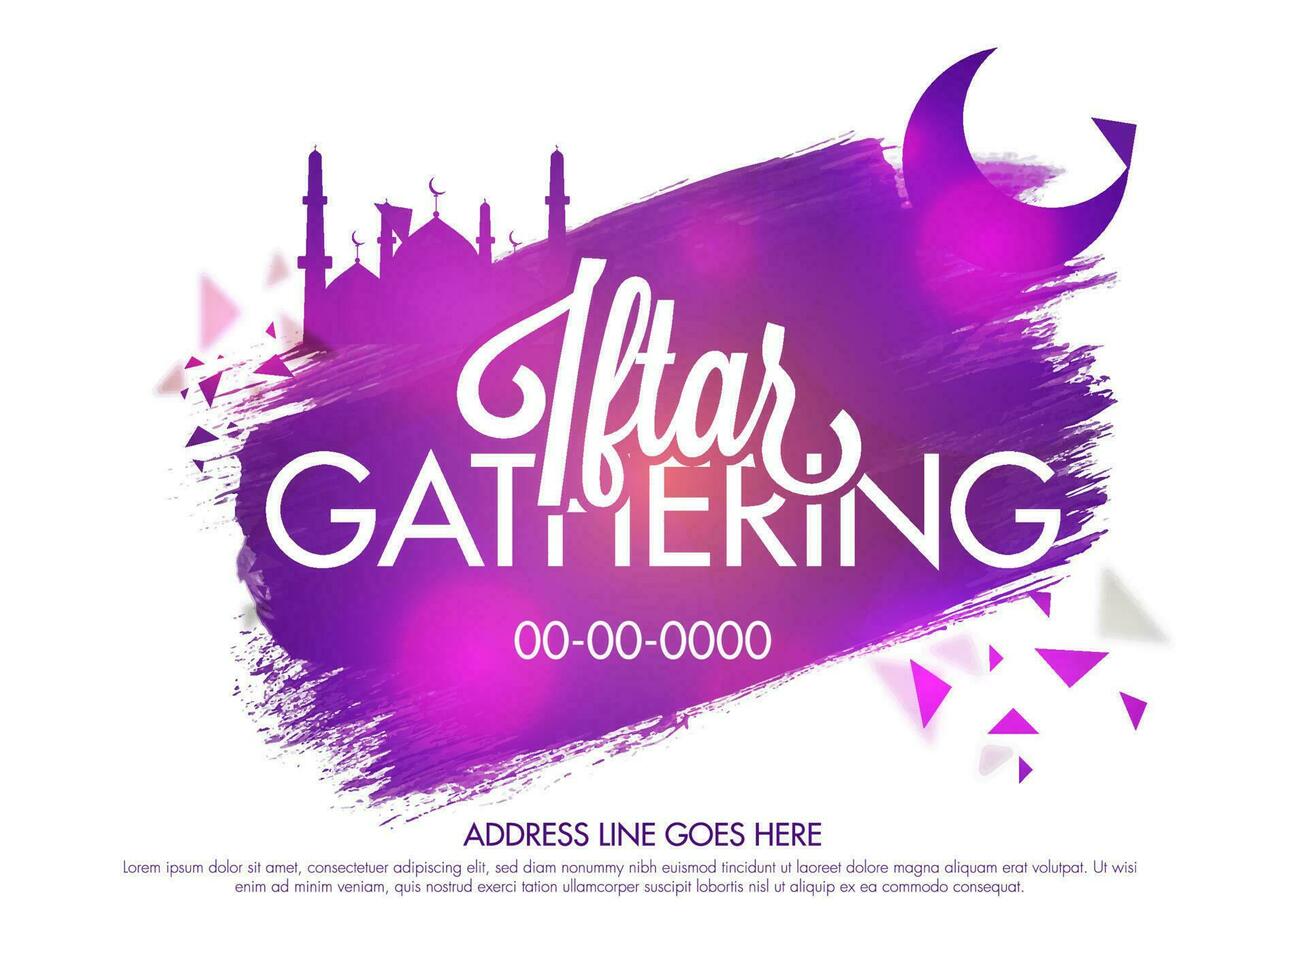 Iftar Gathering Invitation Card, Poster Design With Purple Brush Effect Crescent Moon, Mosque On White Background. vector